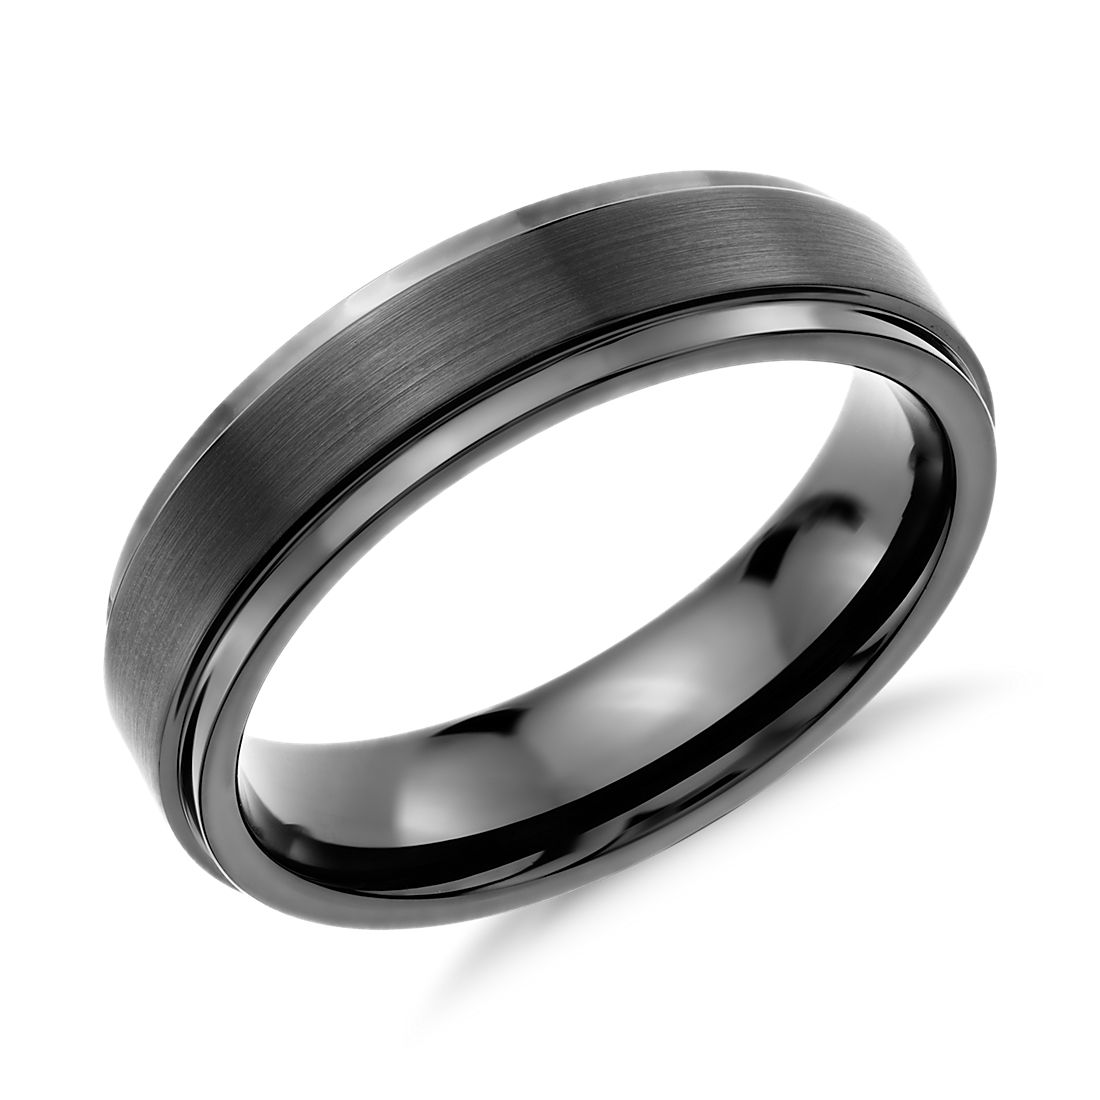 ANAZOZ Stainless Steel High Polished 6MM Silver Black Engagement Band Wedding Rings Couple 